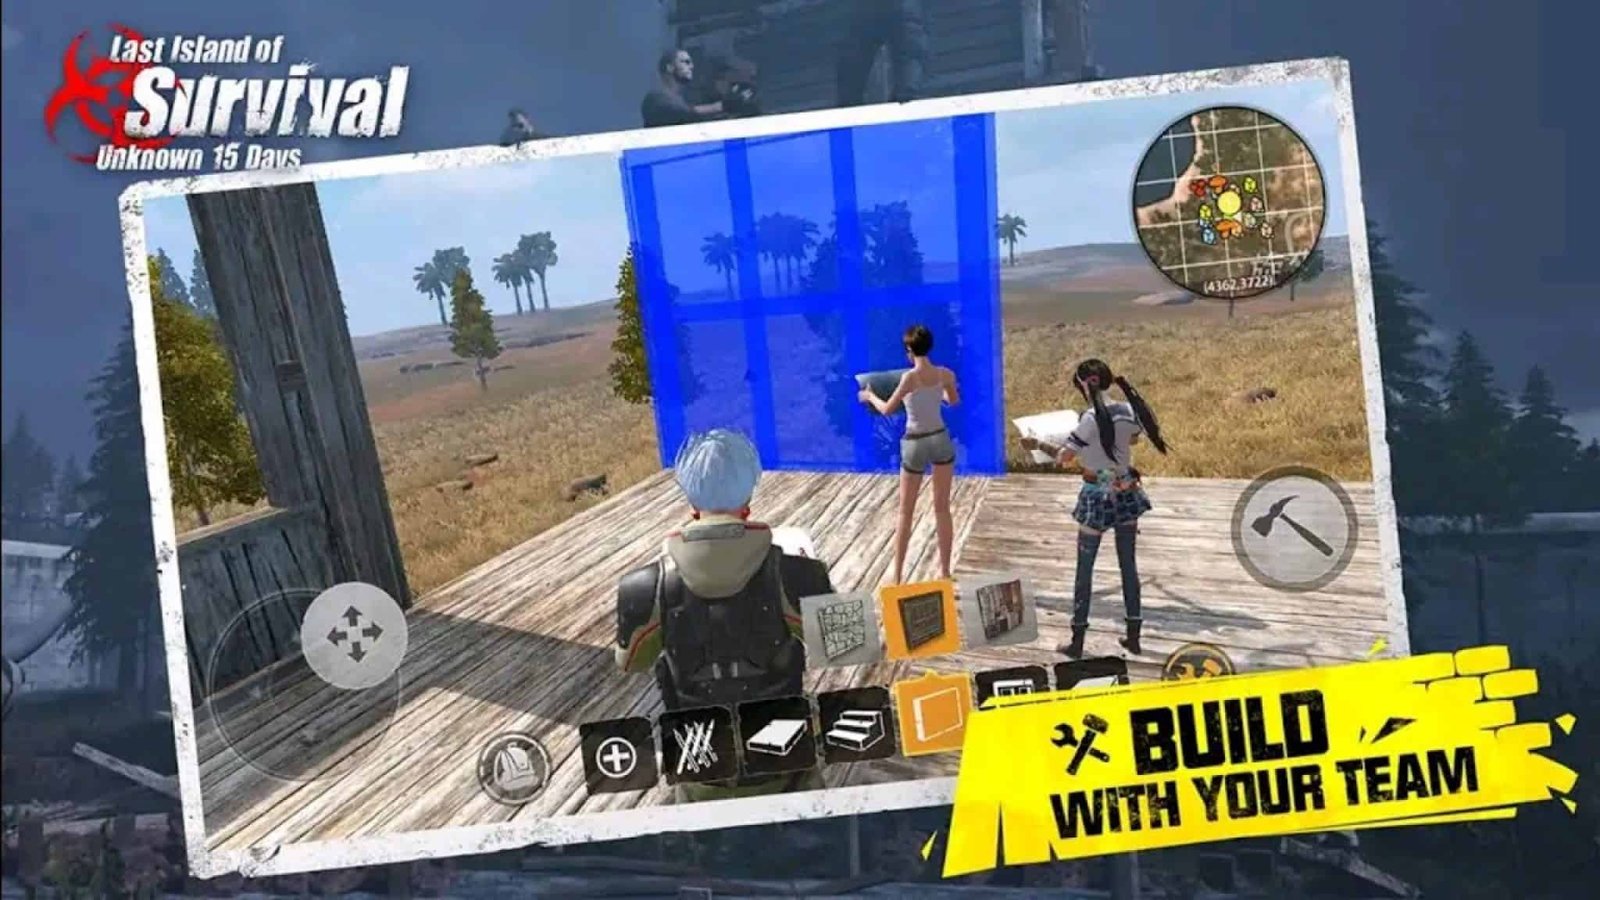 Ласт исланд лайт. Ласт Исланд 15 дейс. Last Island of Survival Unknown 15 Days. Last Island of Survival. Игра last Day Rules Survival.